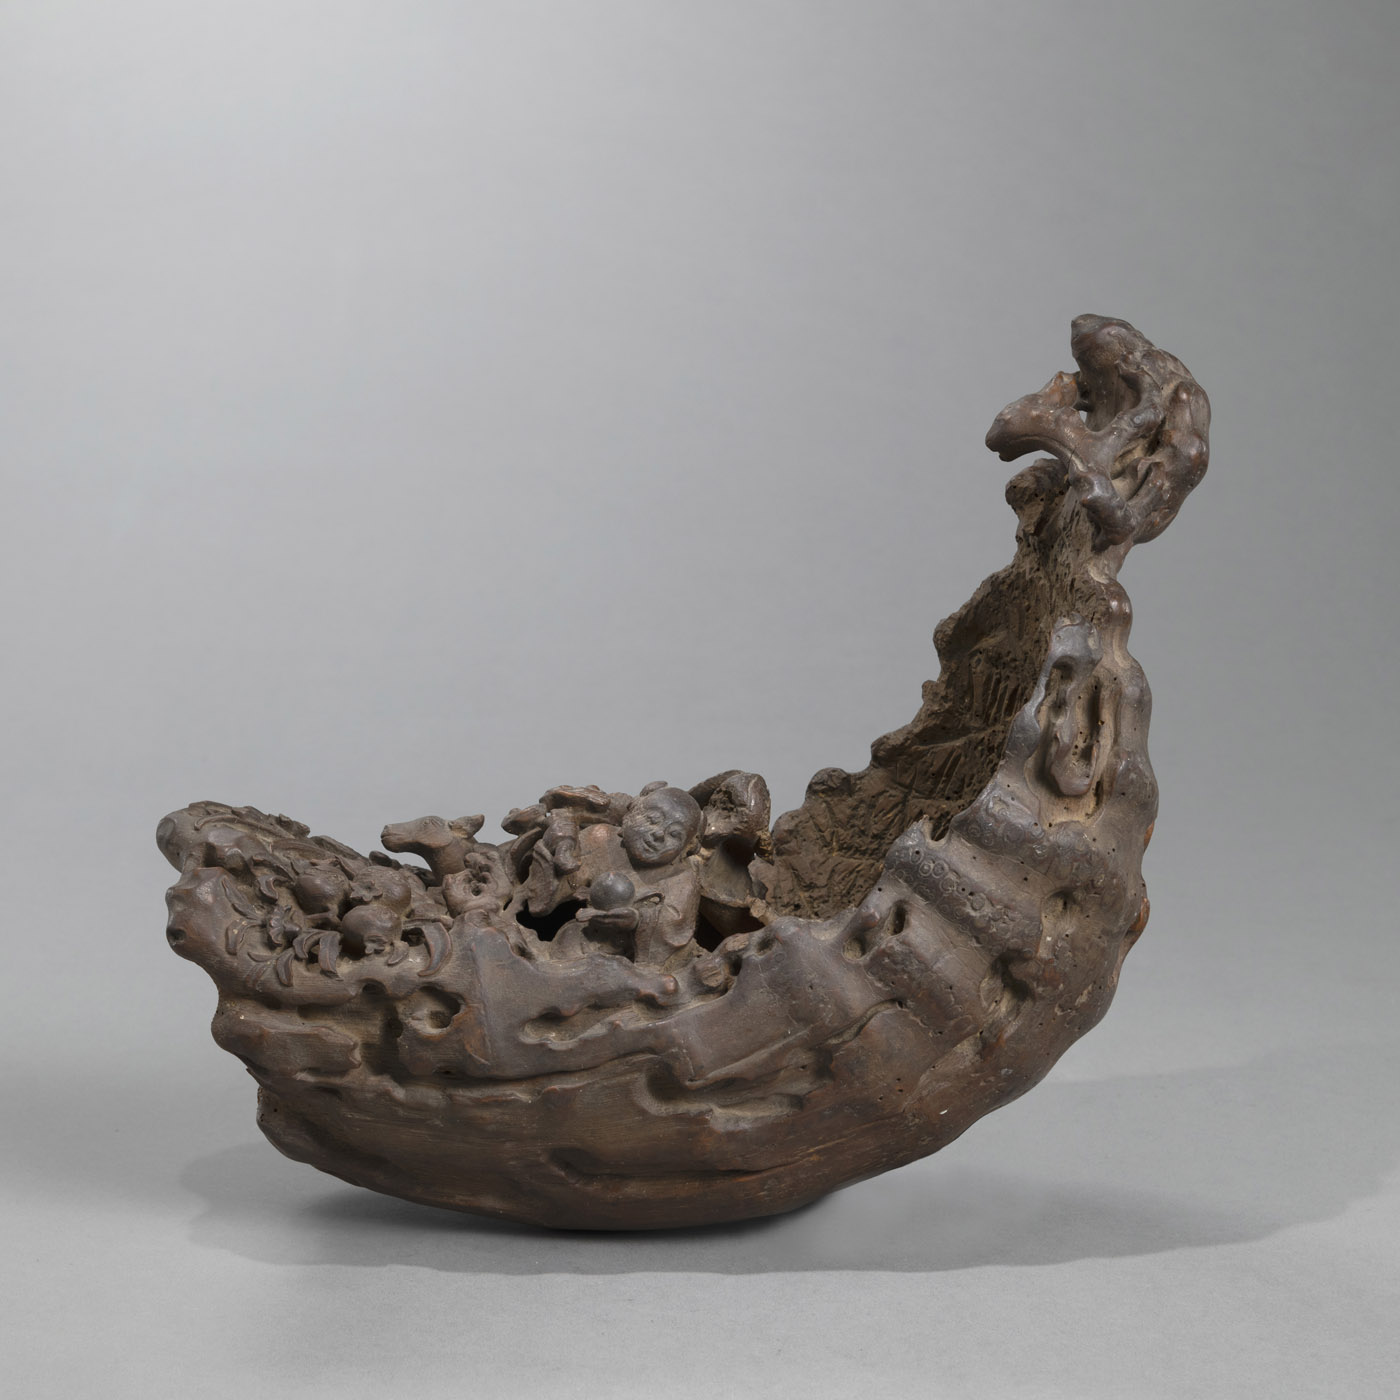 <b>A BAMBOO CARVING IN THE SHAPE OF A BOAT LOADED WITH AUSPICIOUS SYMBOLS: A BOY WITH LINGZHI, 'SANDUO' FRUITS, DEER AND CRANE</b>